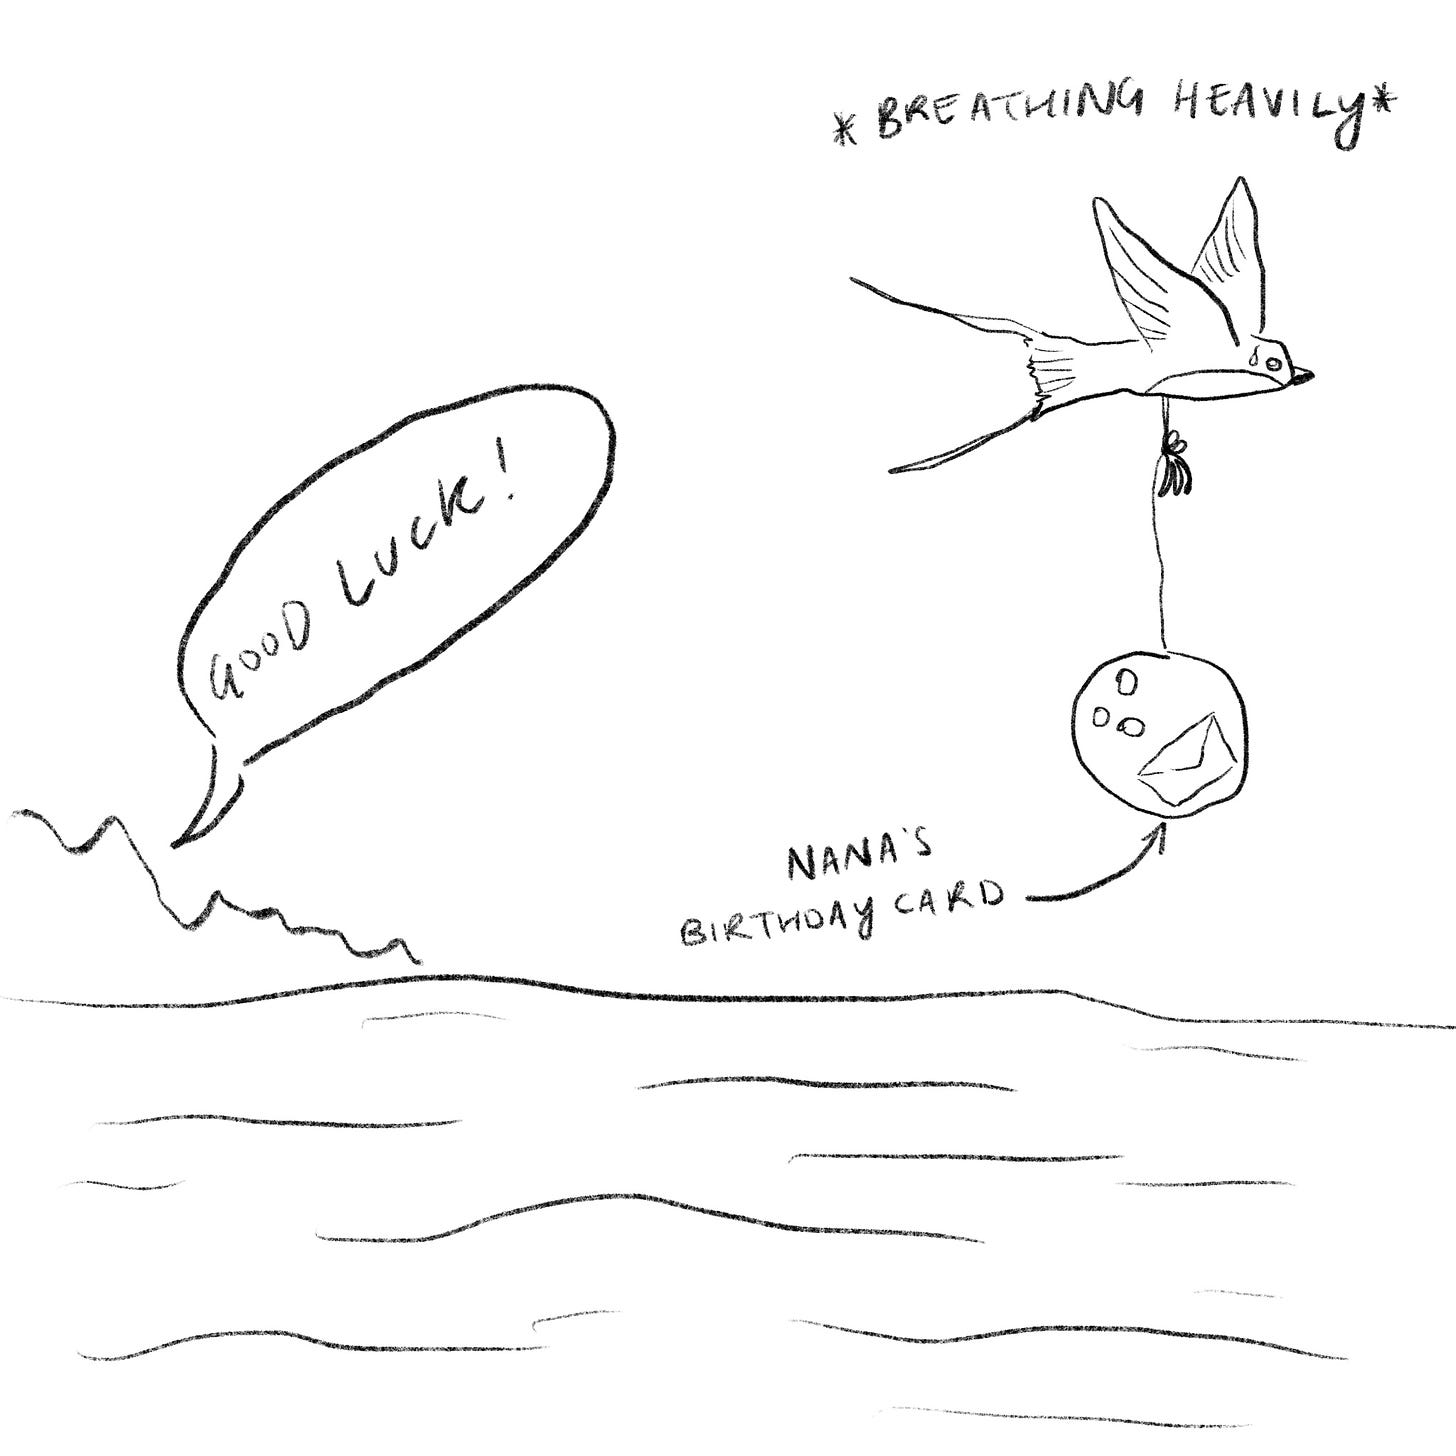 A swallow with a coconut attached to its leg and a letter inside, flying over the ocean. The island in the background is saying 'good luck' while the swallow is breathing heavily. 